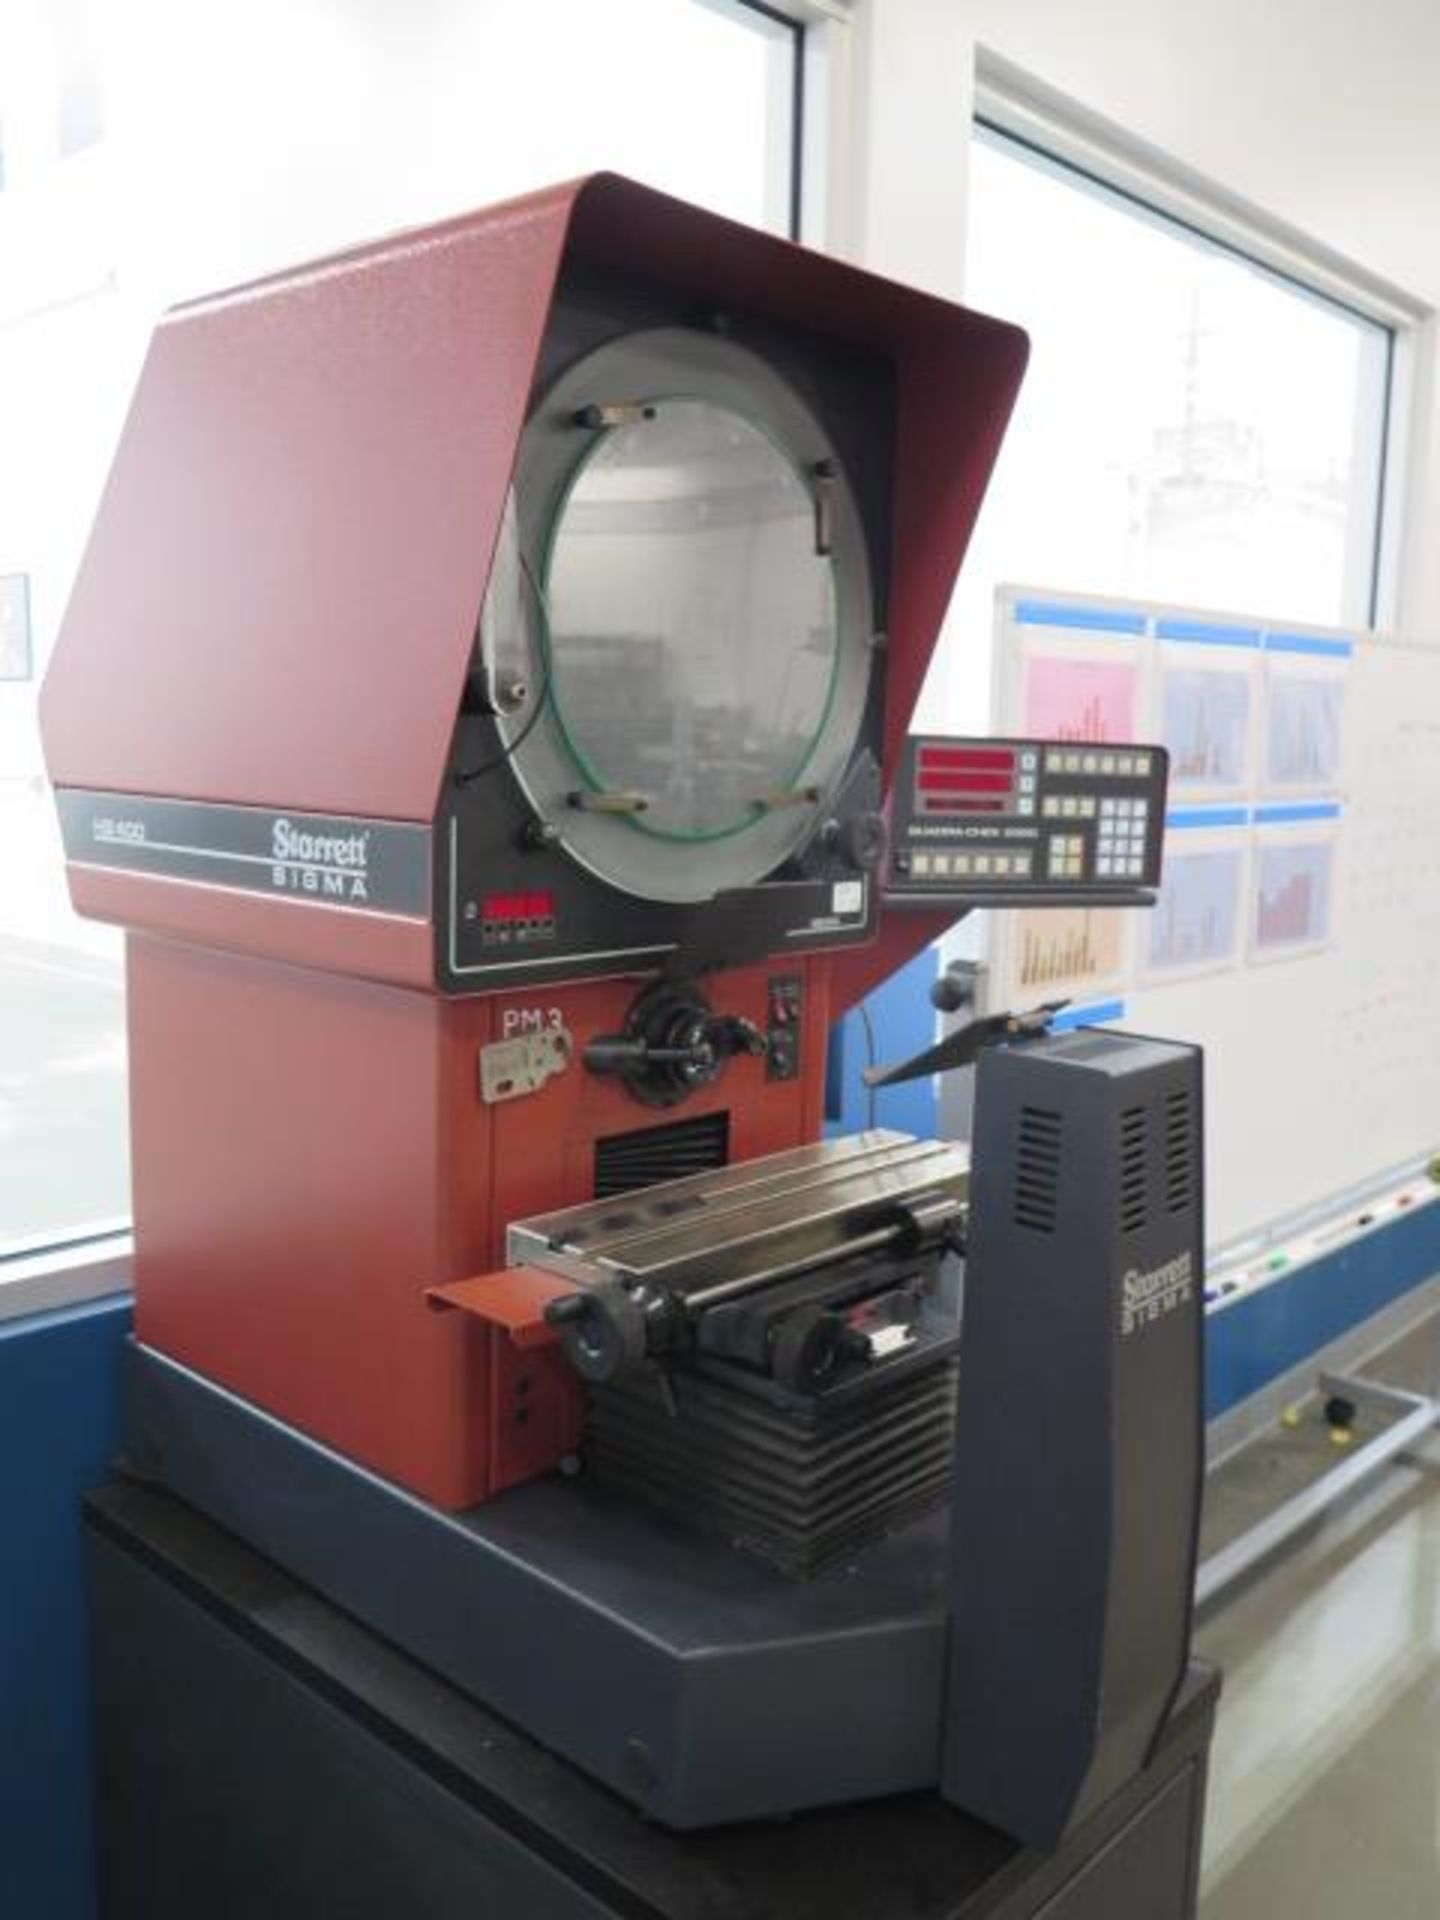 Starrett HB400 15” Optical Comparator s/n 5484 w/ Quadra-Chek 2000 Programmable DRO, SOLD AS IS - Image 4 of 11